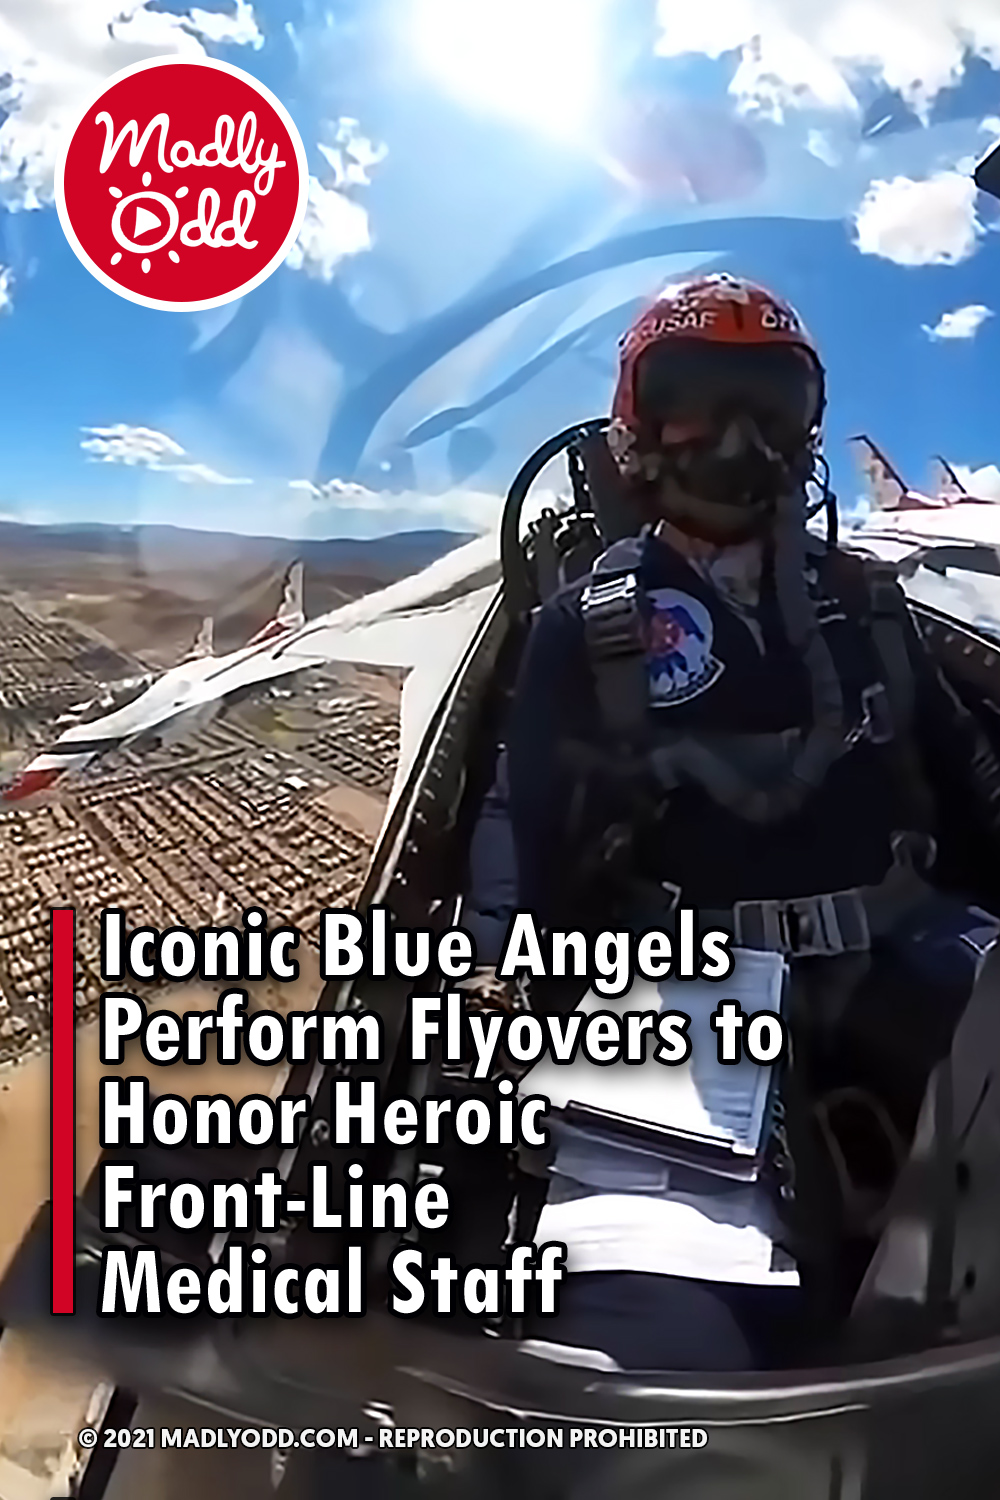 Iconic Blue Angels Perform Flyovers to Honor Heroic Front-Line Medical Staff